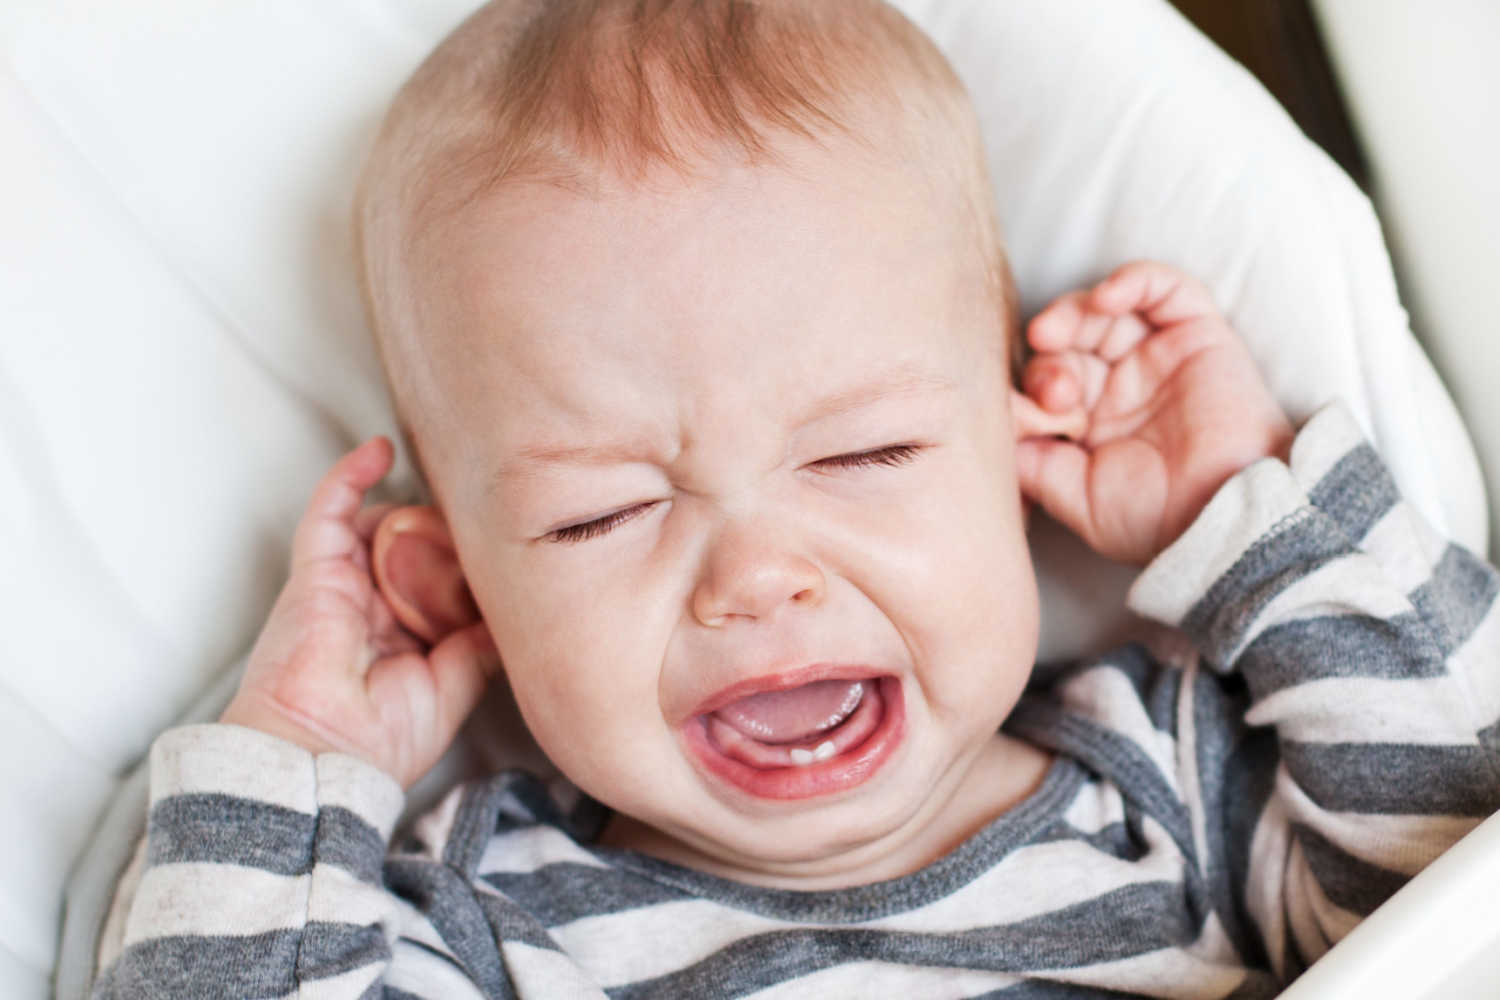 Toddler pulling ears and crying